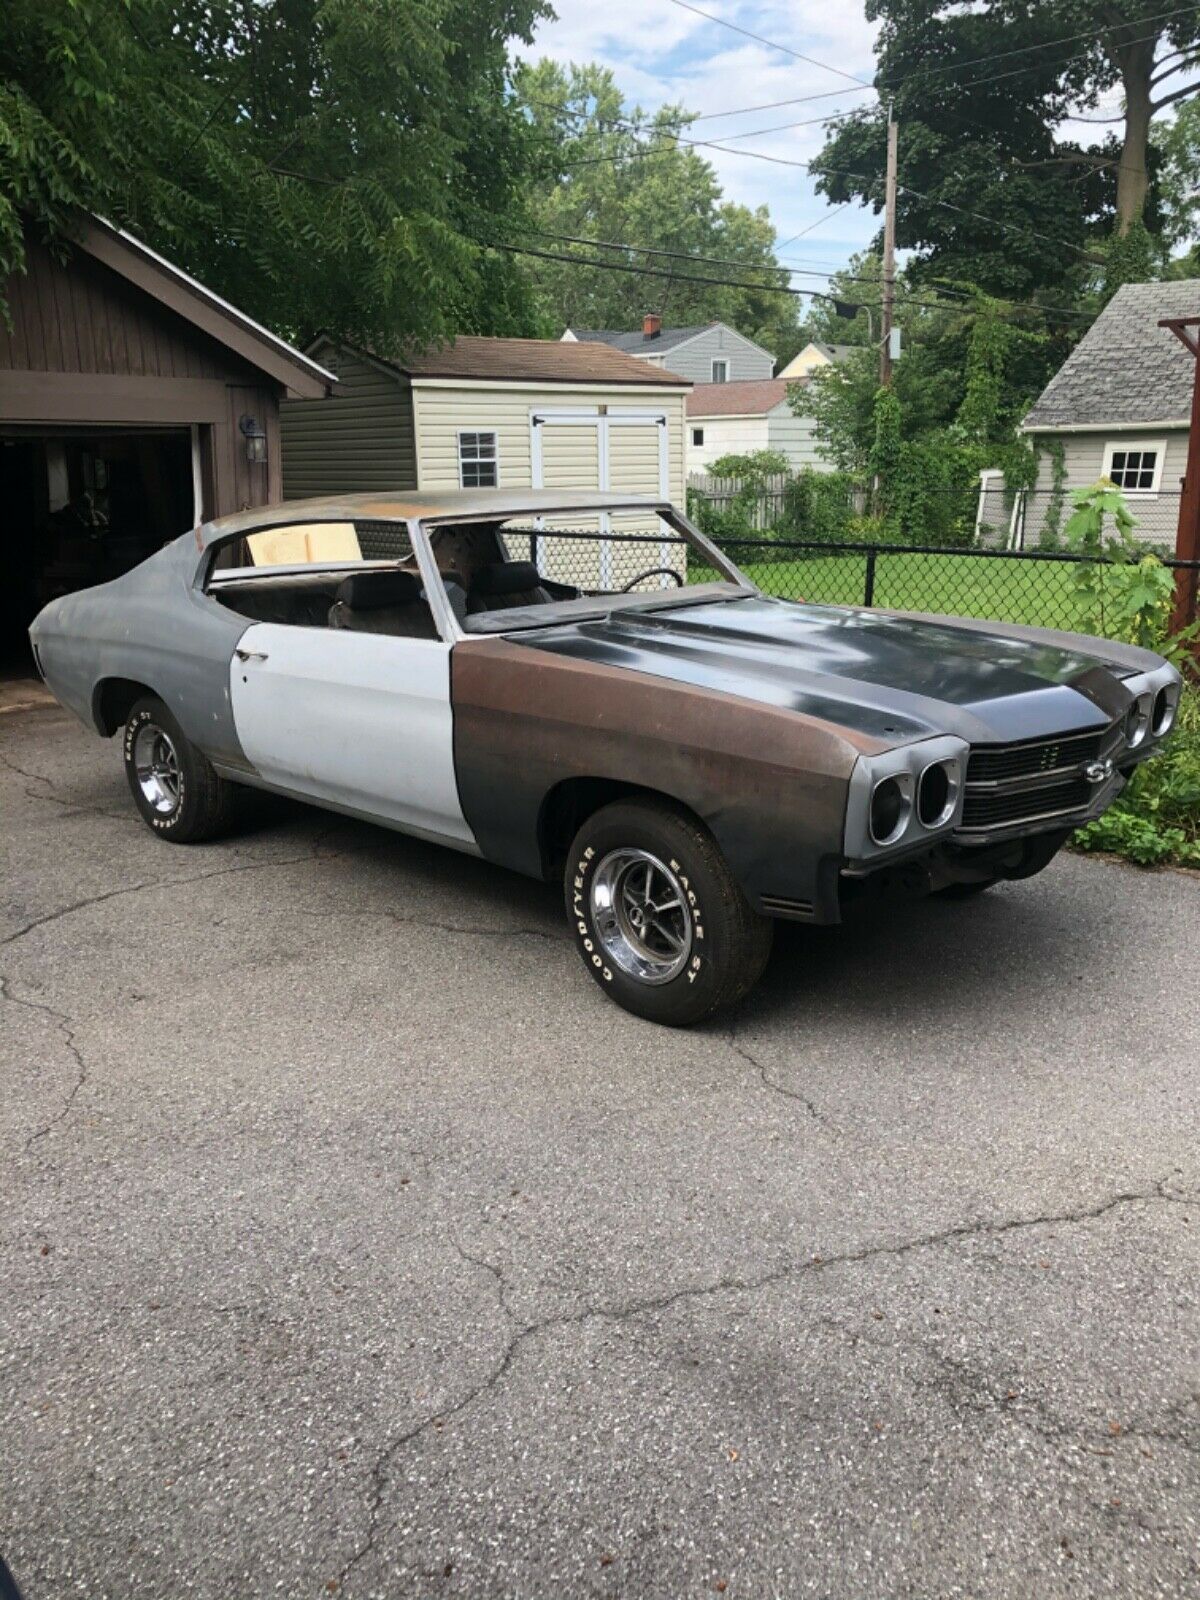 Missing Drivetrain 1970 Chevrolet Chevelle Ss Project For Sale